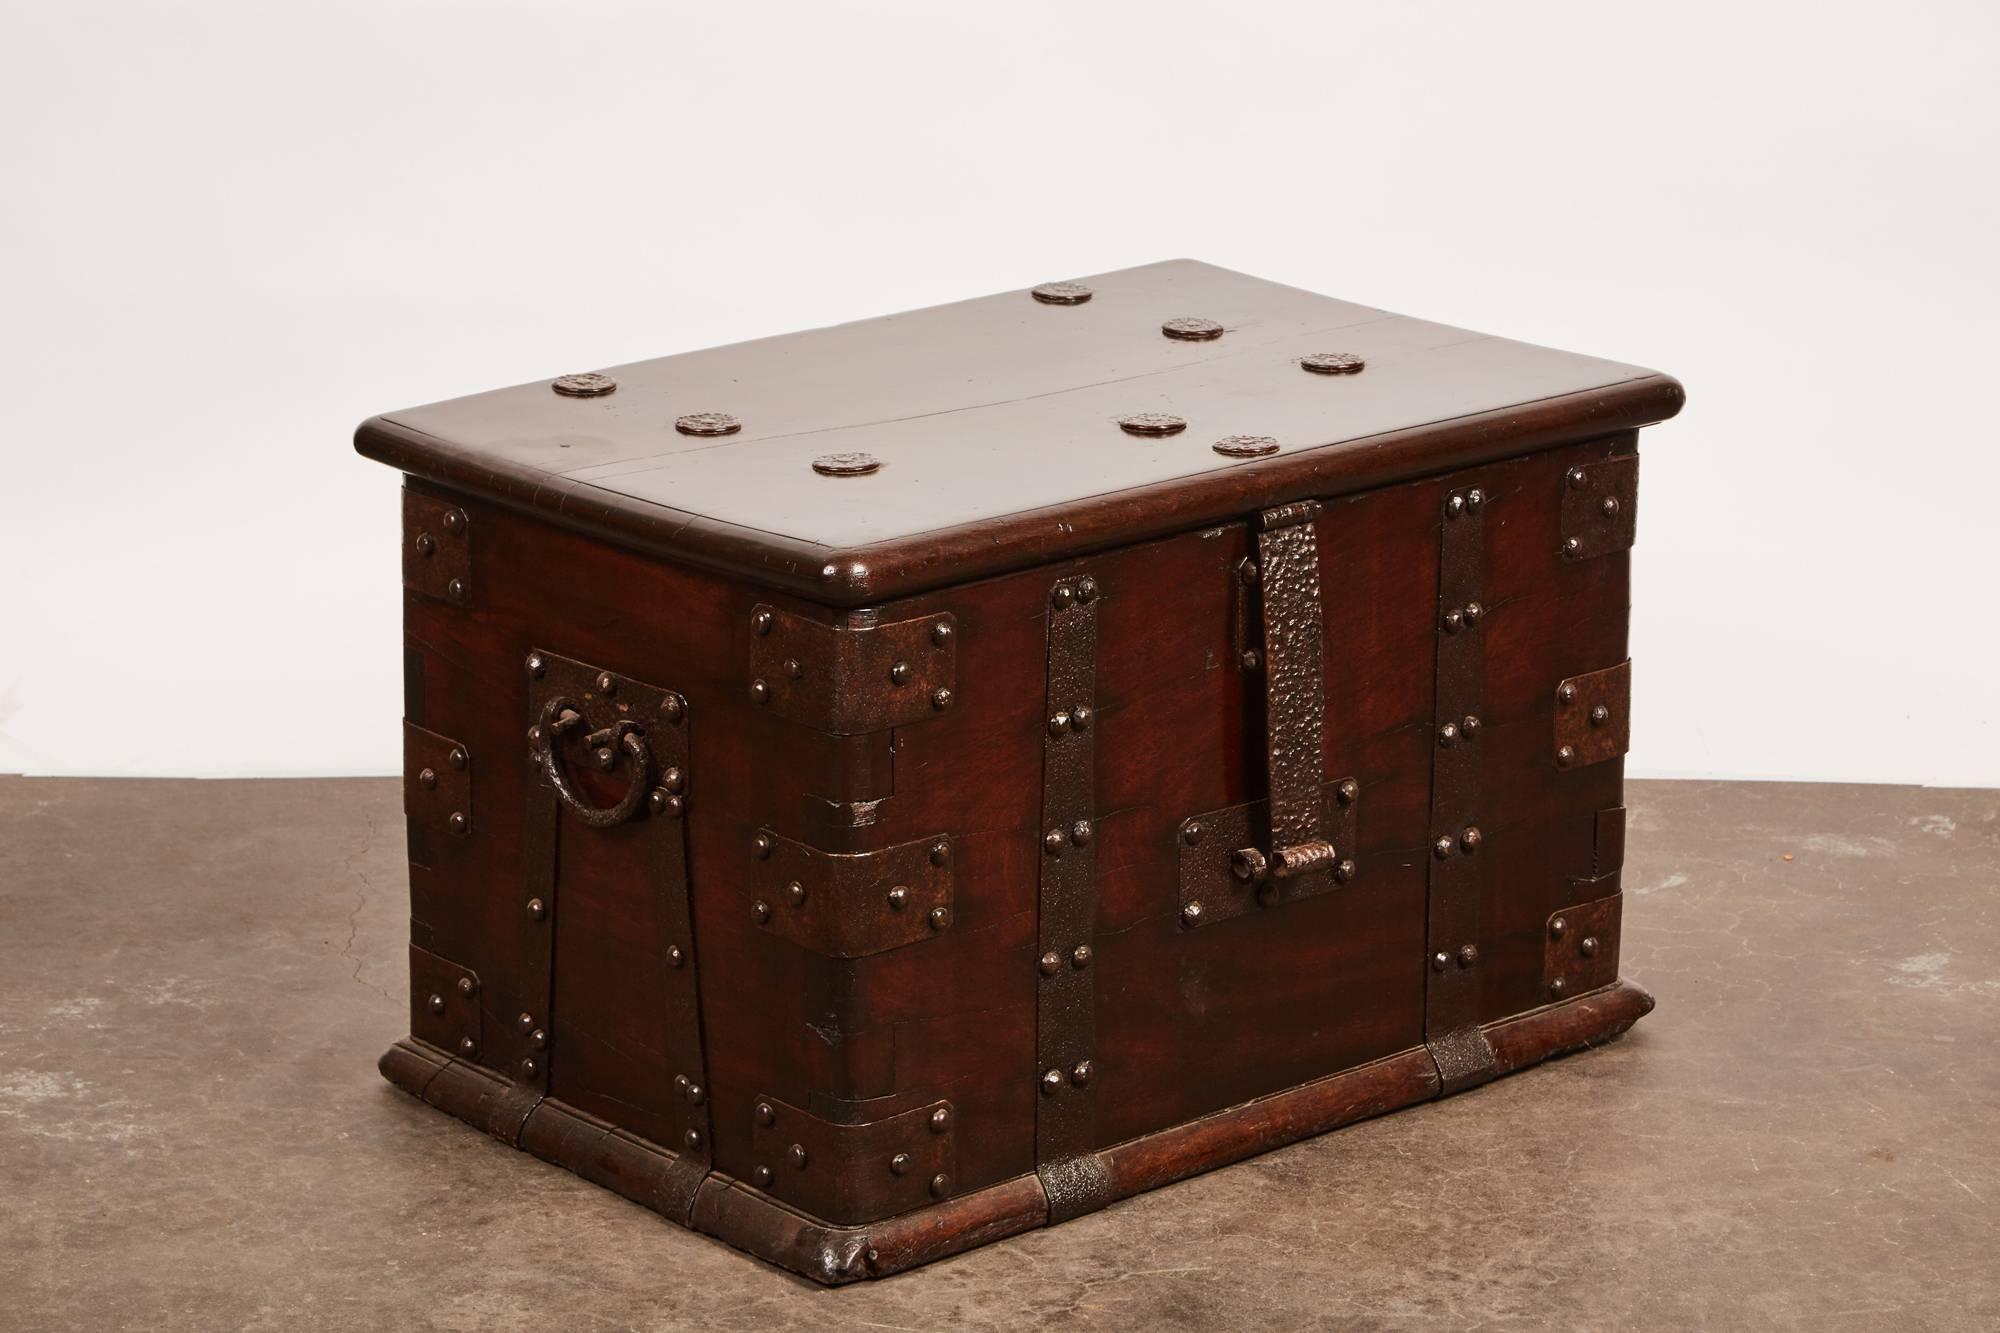 A late 18th century Chinese iron bound money safe from Guangdong, China. The piece features simple and exquisite metal work, nailheads, and comes with a key made from iron wood. Within the money safe there is one shelf on the right side of the chest.